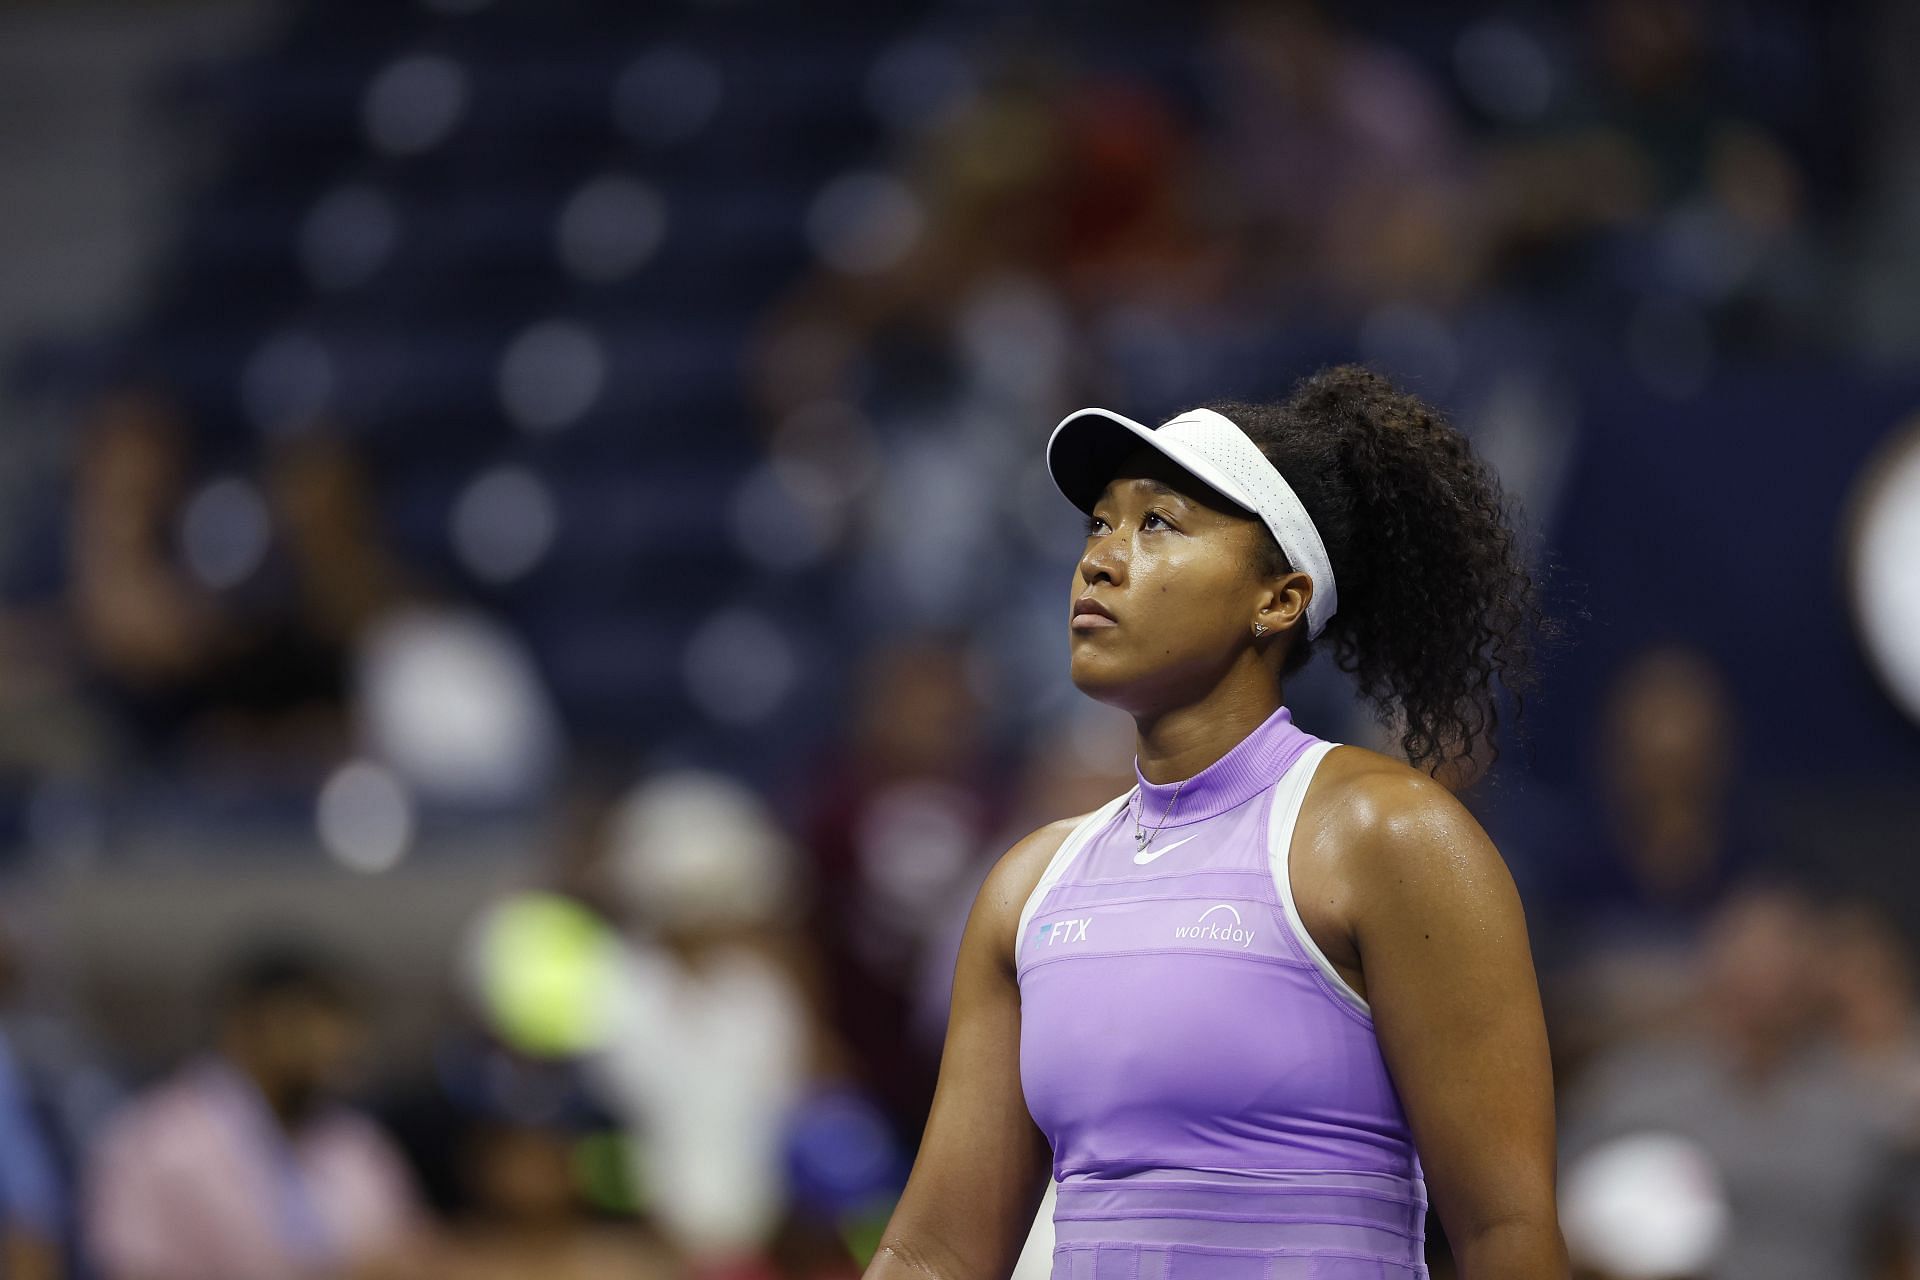 Naomi Osaka will face Daria Saville in the first round of the Toray Pan Pacific Open